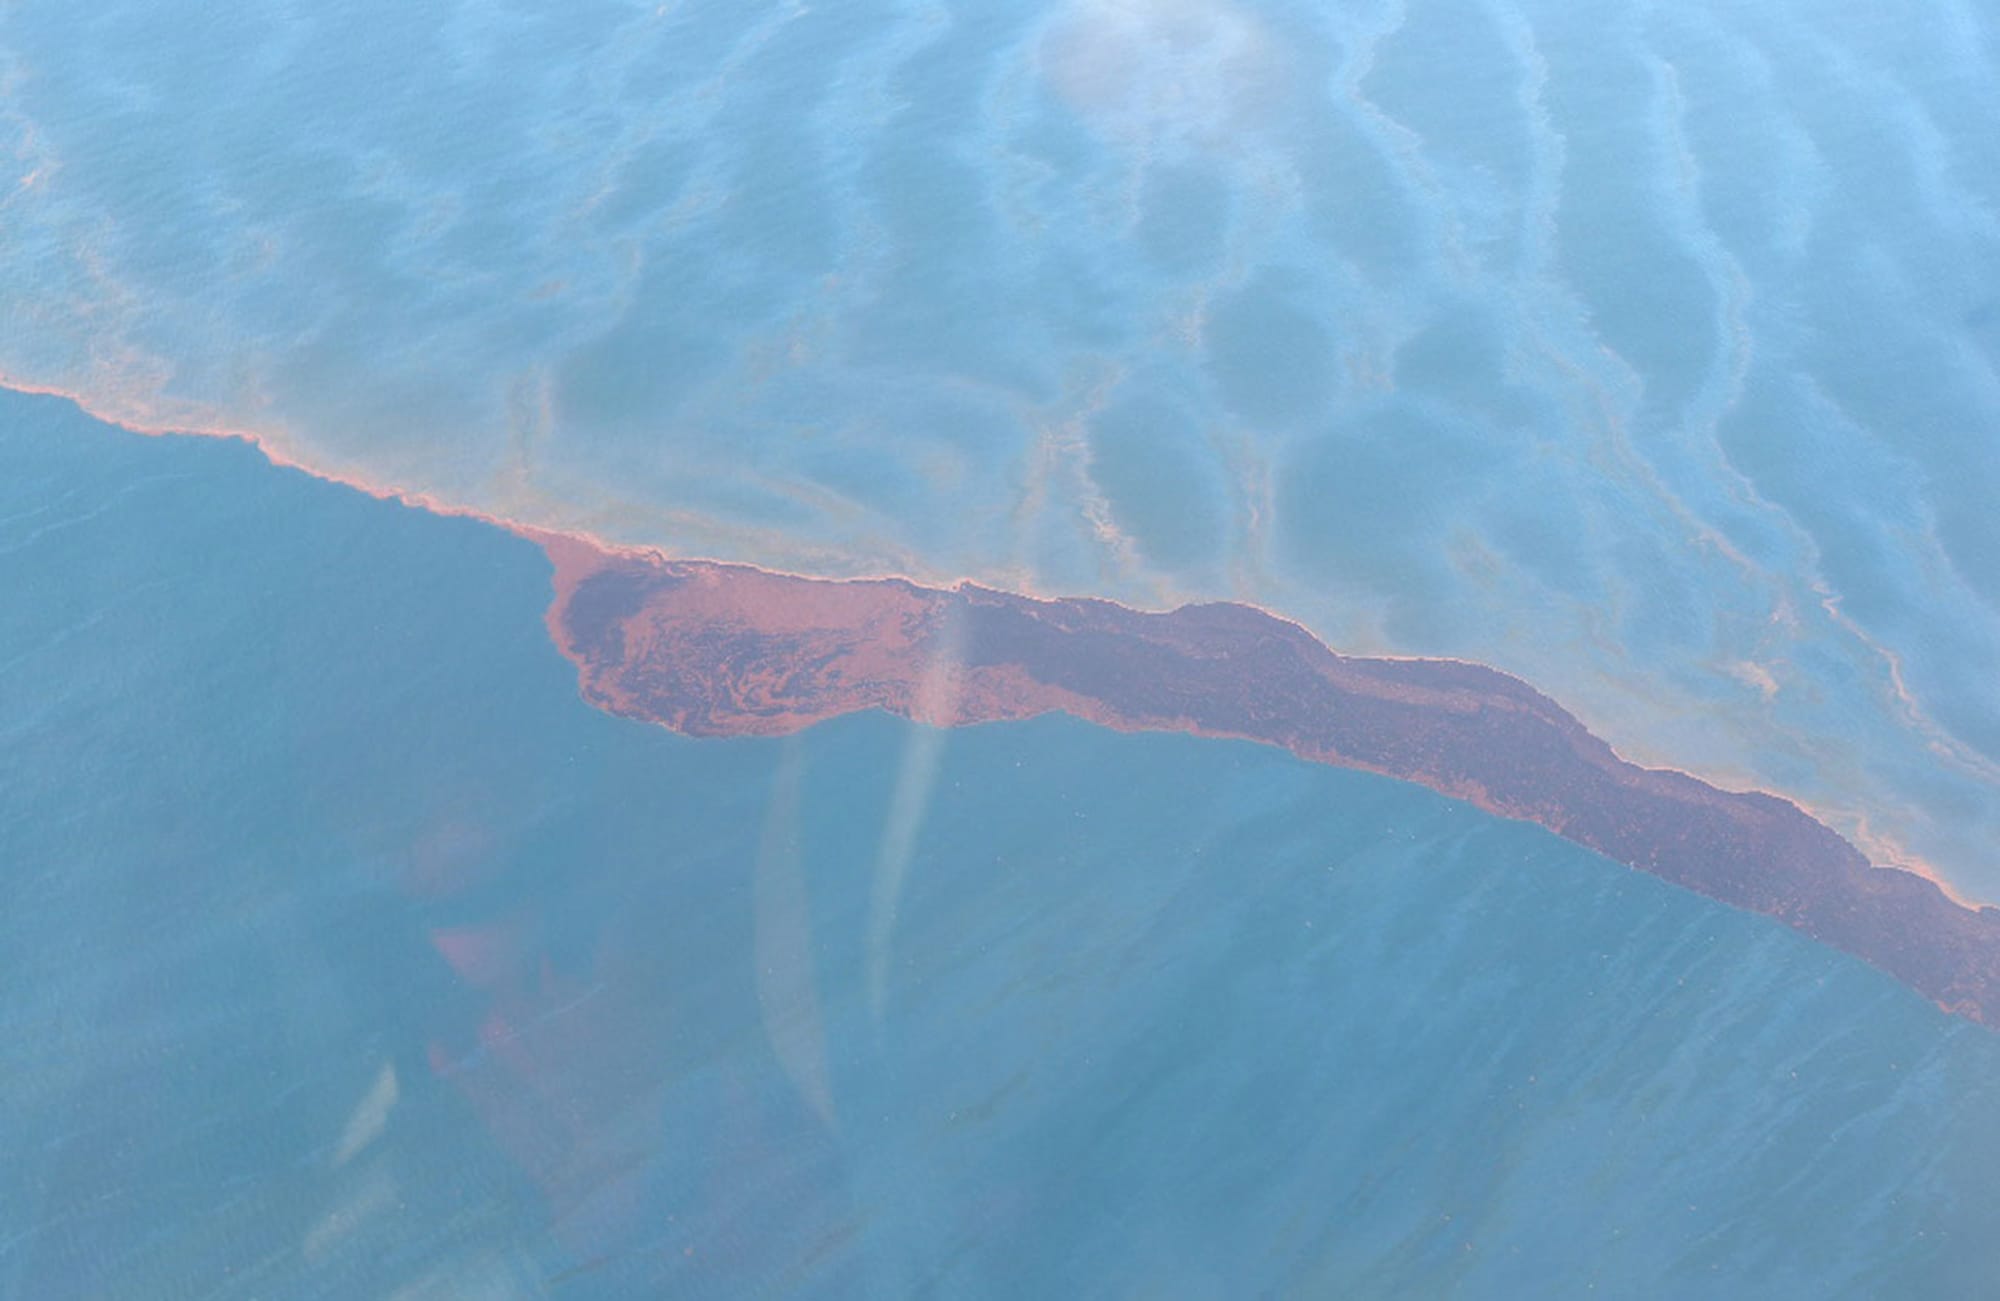 Surface oil from the BP Deepwater Horizon oil spill floats in the Gulf on May 25, 2010, near Pass a Loutre, La.